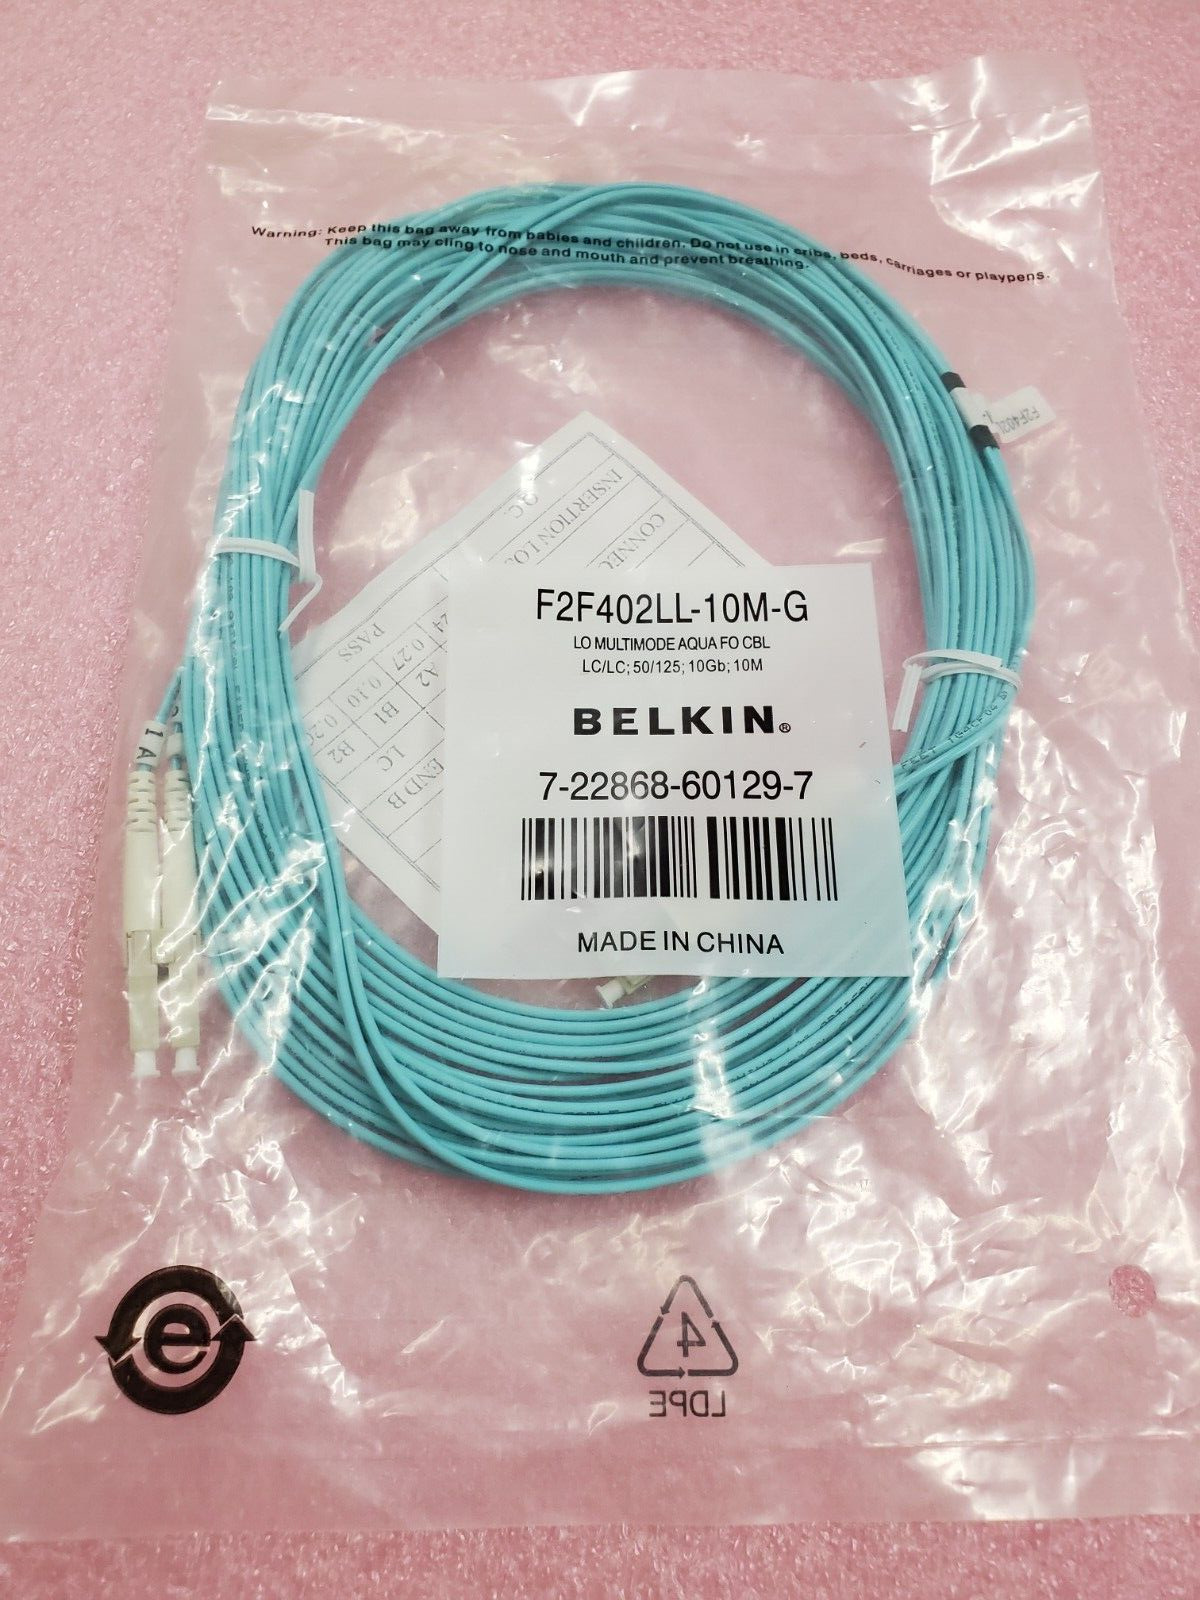 Belkin Male-to-Male Fiber Optic Patch Cable F2F402LL-10M-G